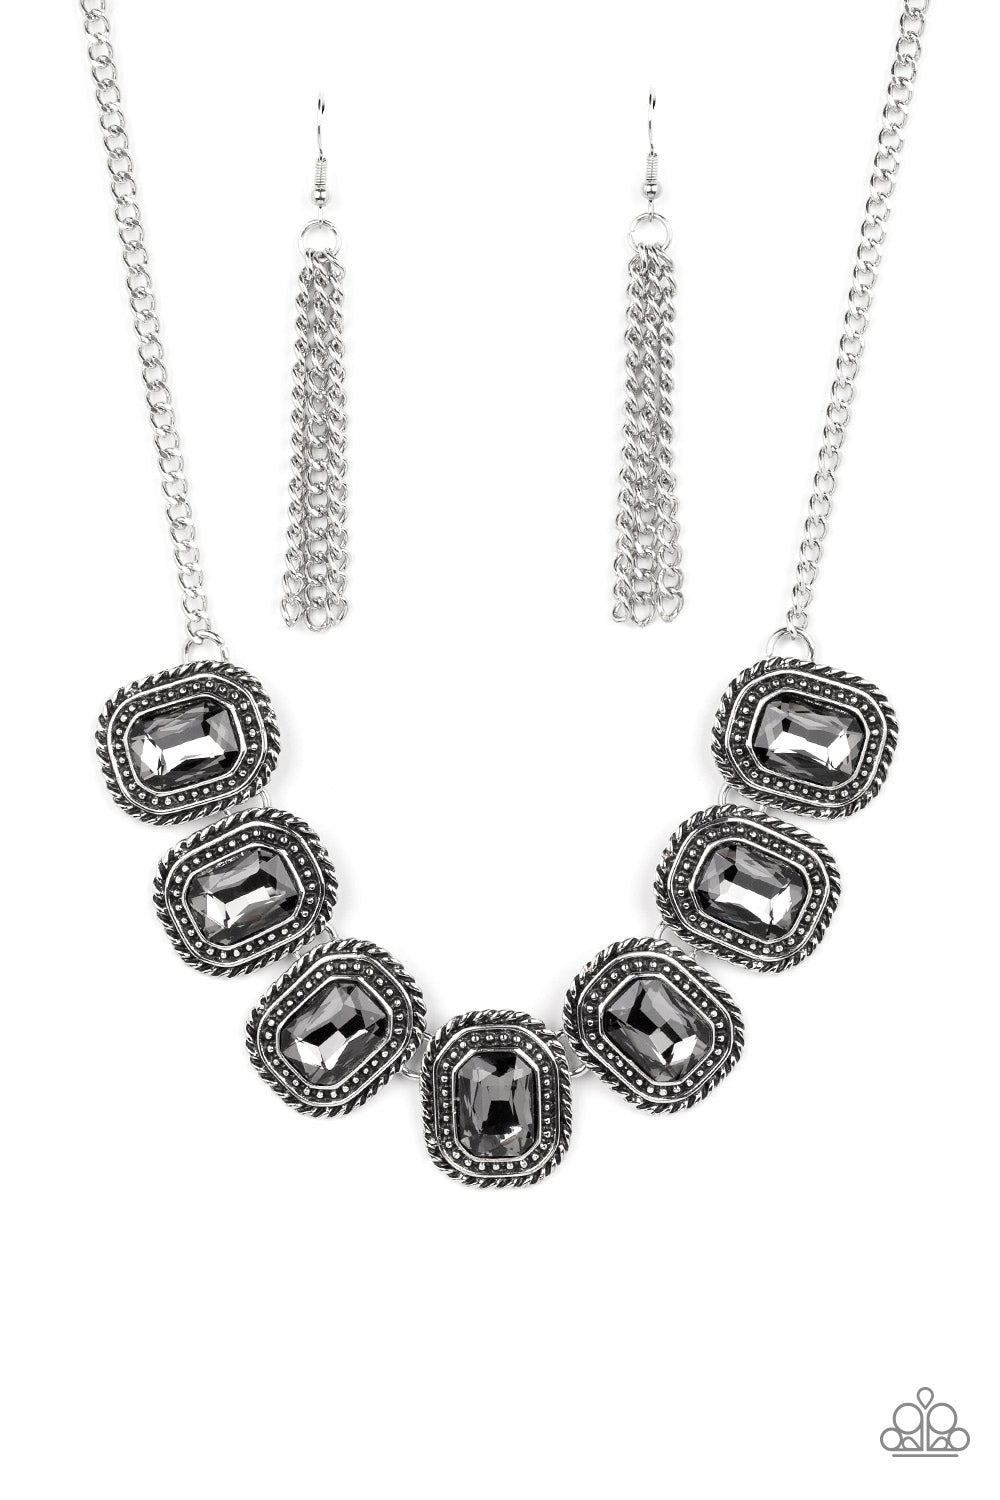 Paparazzi Accessories Iced Iron - Silver Convention Necklaces pressed into silver, chain-like frames, radiant-cut hematite rhinestones smolder below the collar in a jaw-dropping finish. Features an adjustable clasp closure.  Sold as one individual necklace. Includes one pair of matching earrings.  2022 Glow Convention 